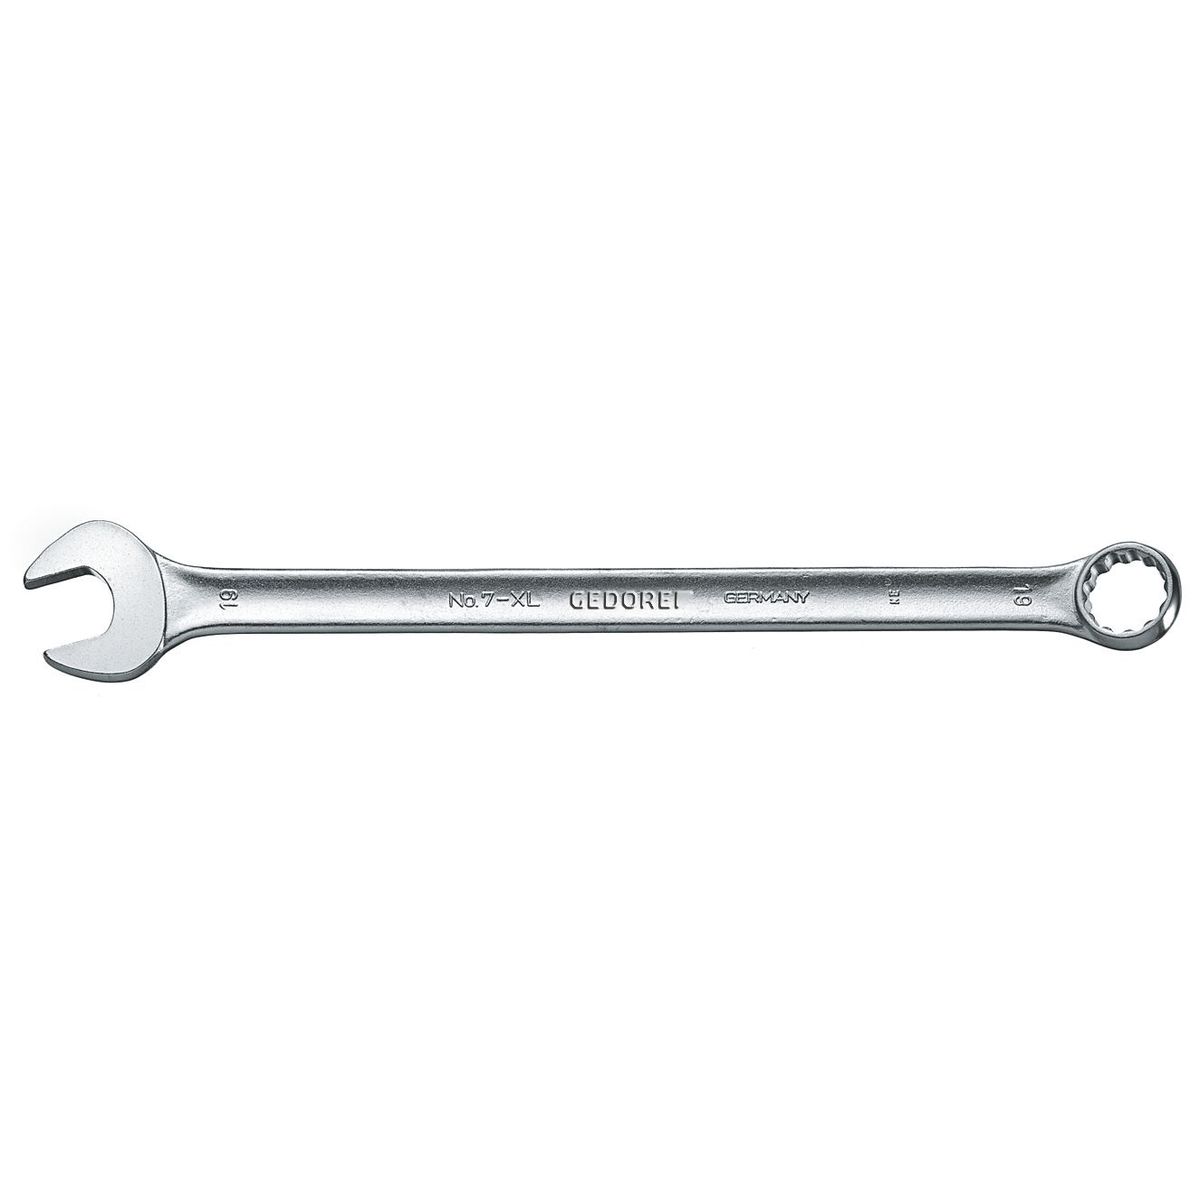 Combination spanner, extra long 32mm No.7 XL 32 Gedore